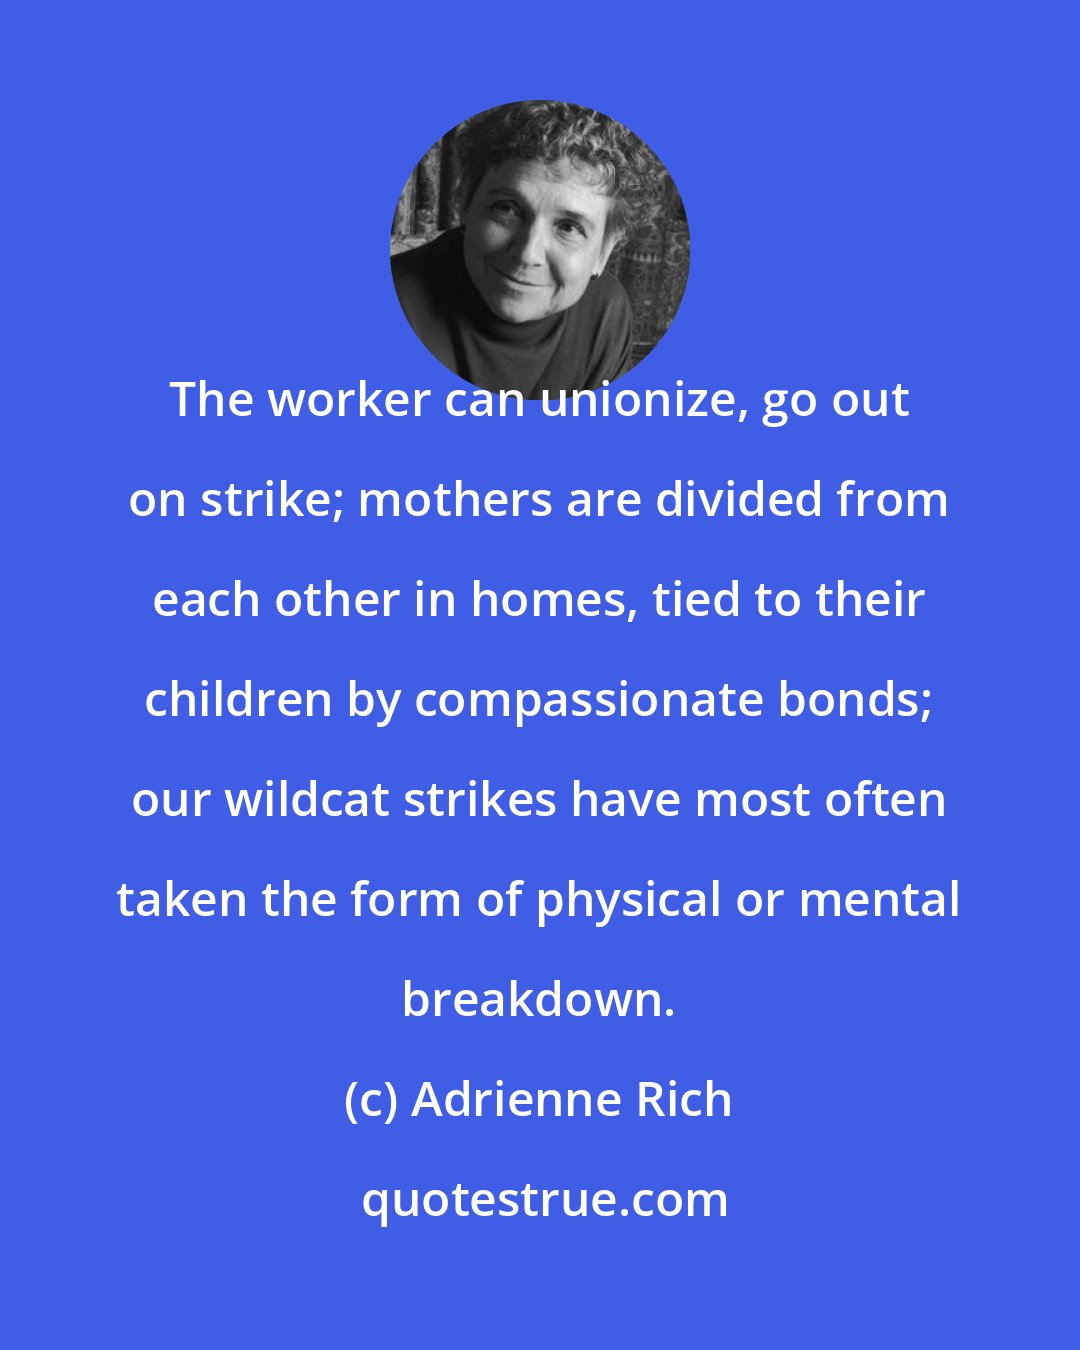 Adrienne Rich: The worker can unionize, go out on strike; mothers are divided from each other in homes, tied to their children by compassionate bonds; our wildcat strikes have most often taken the form of physical or mental breakdown.